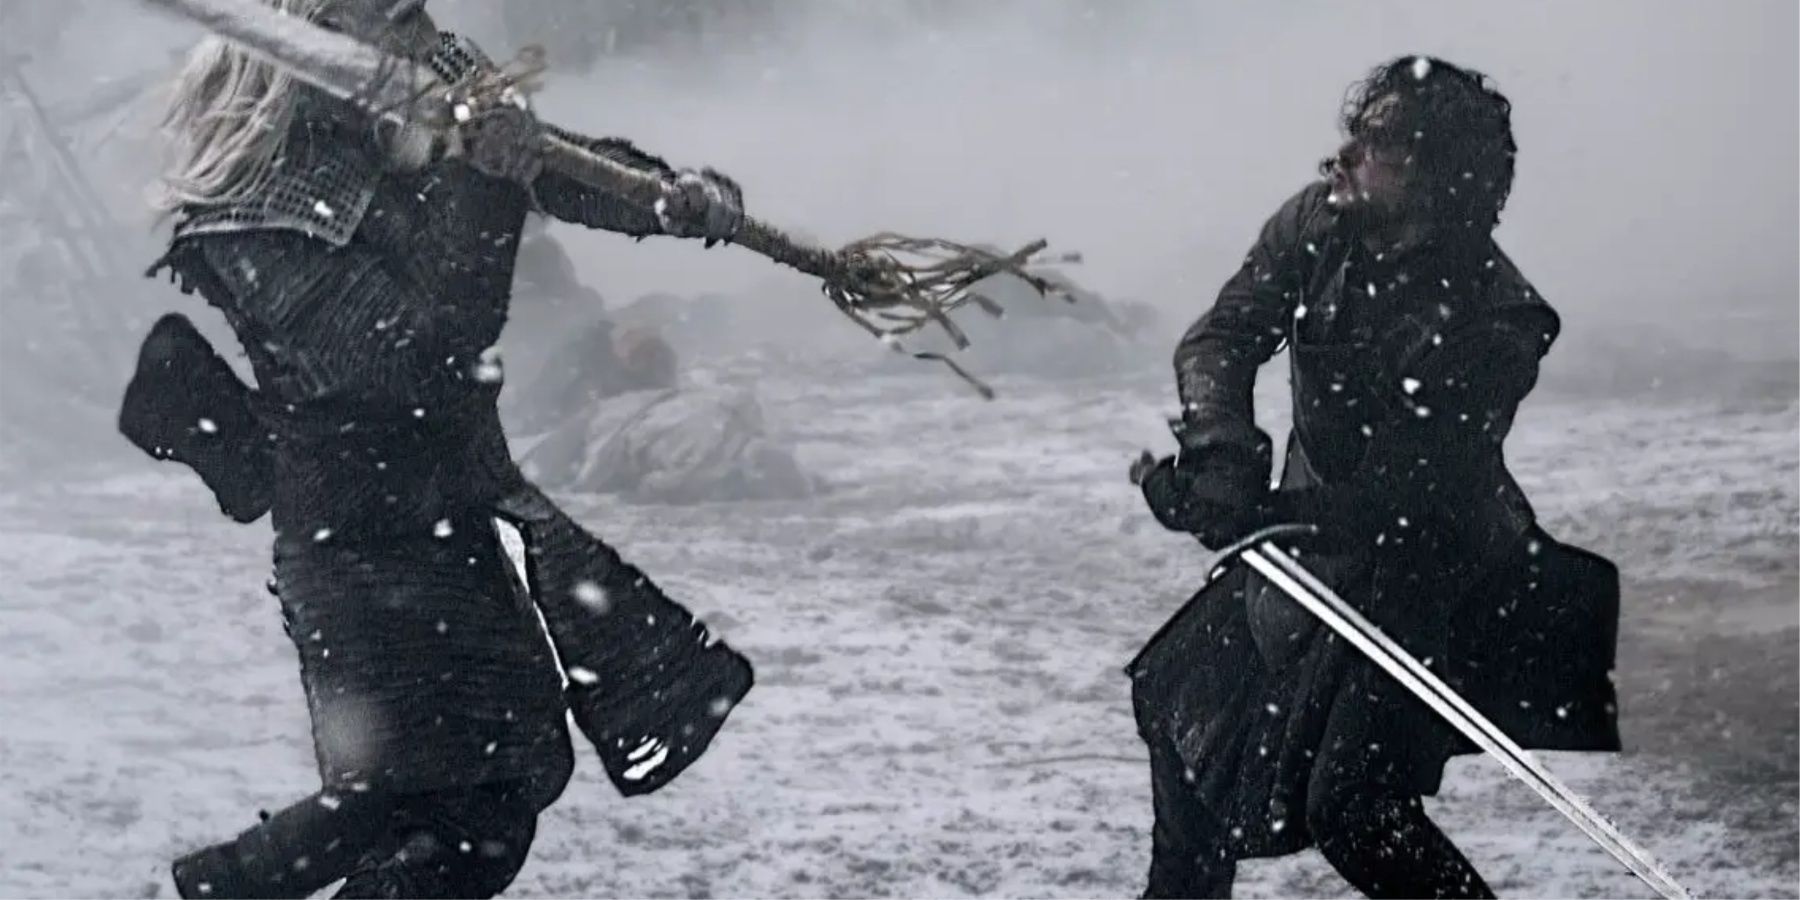 A White Walker fights with Jon Snow at Hardhome in Game of Thrones.